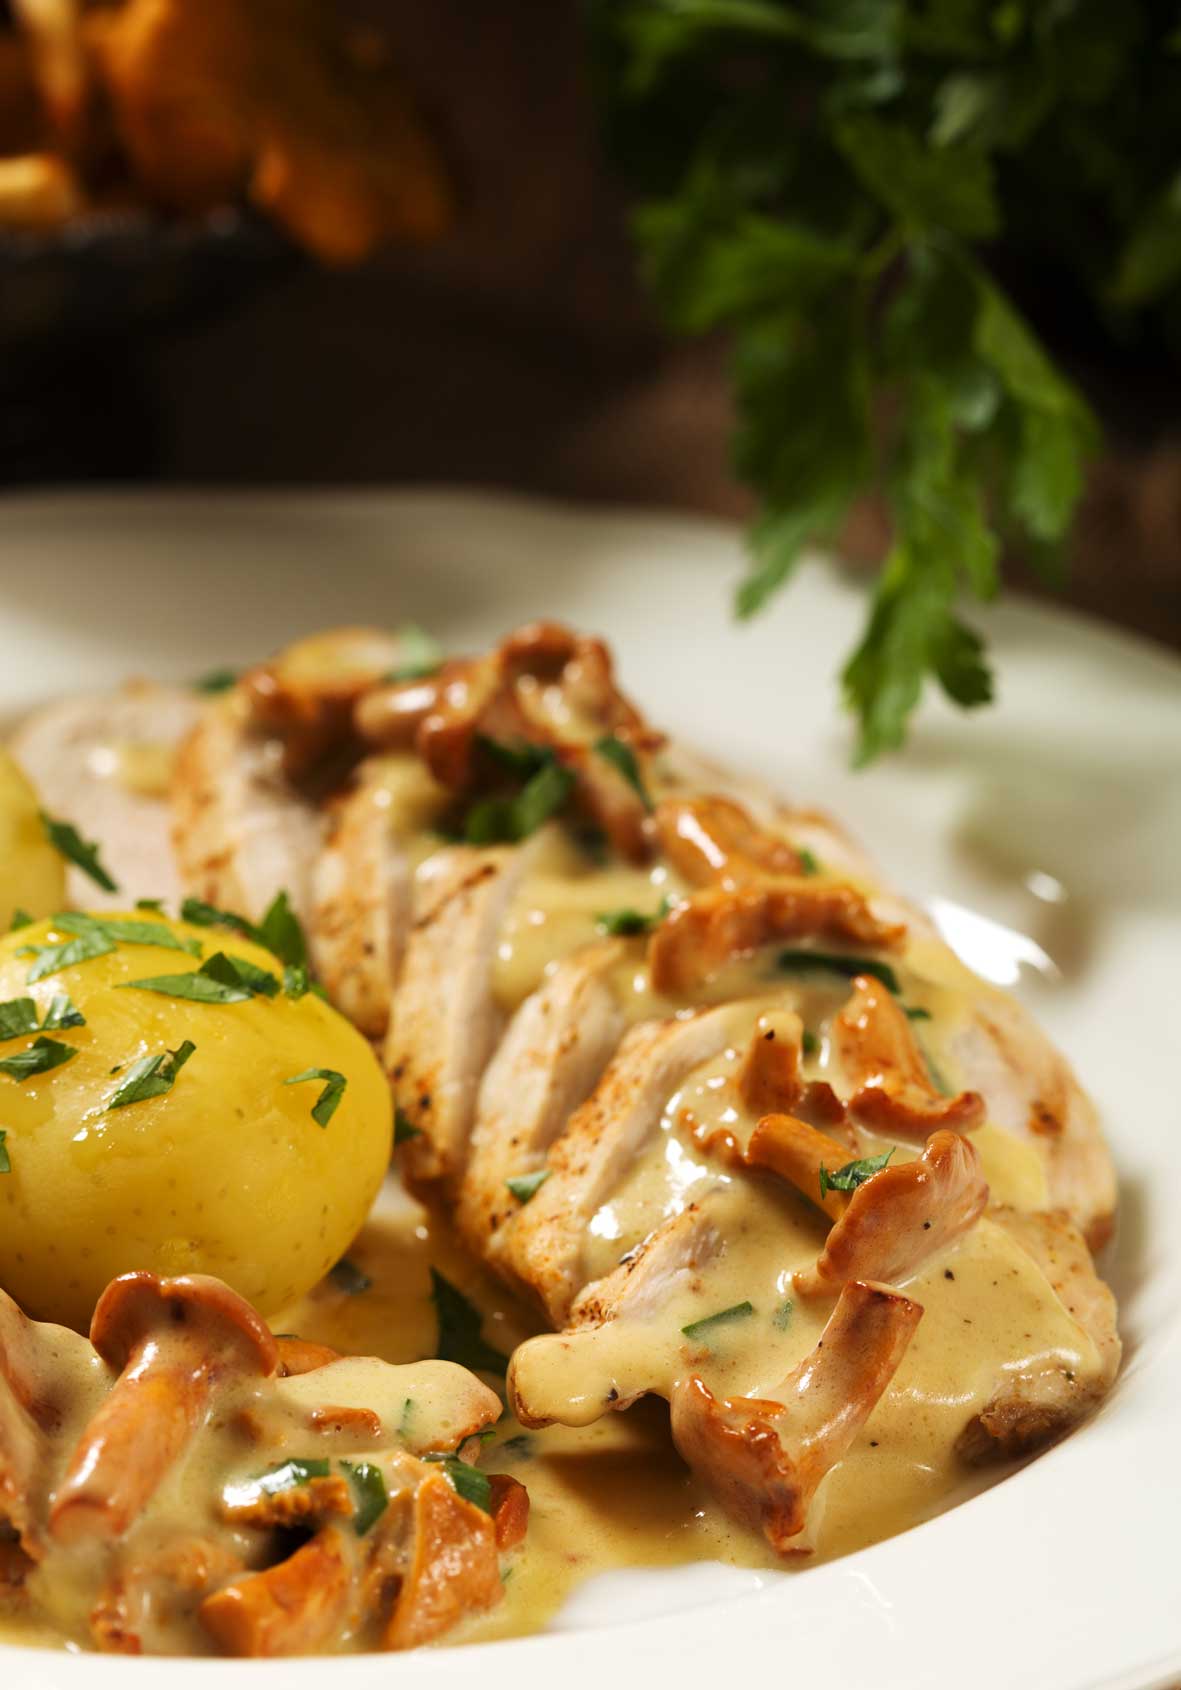 Pheasant in almond sauce with mushrooms and potatoes